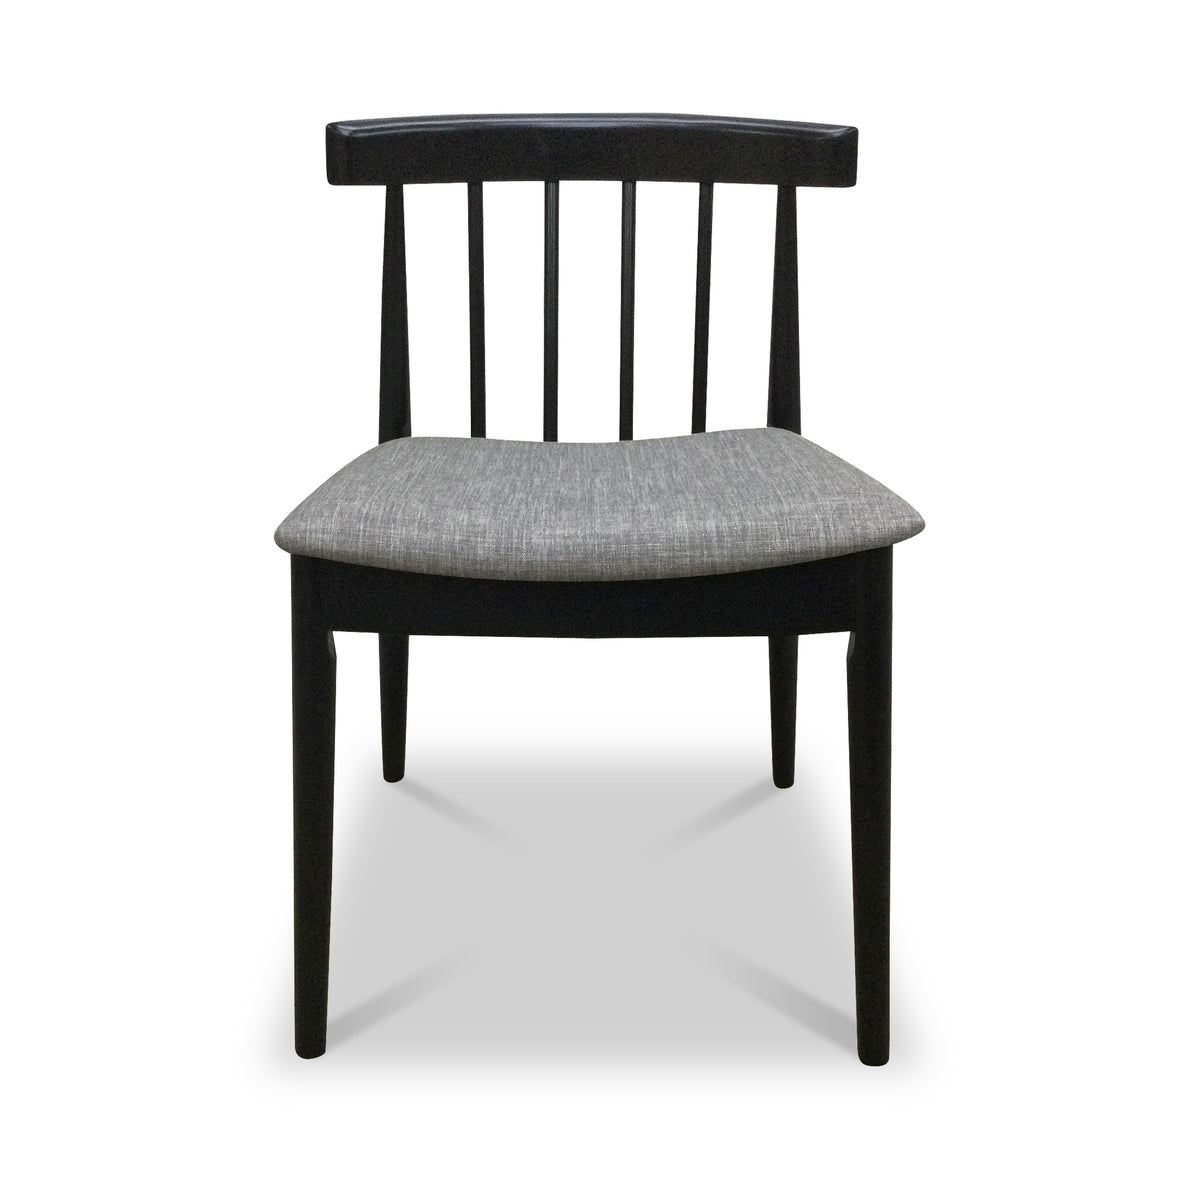 Jackson Dining Chair with Black Frame with grey seat